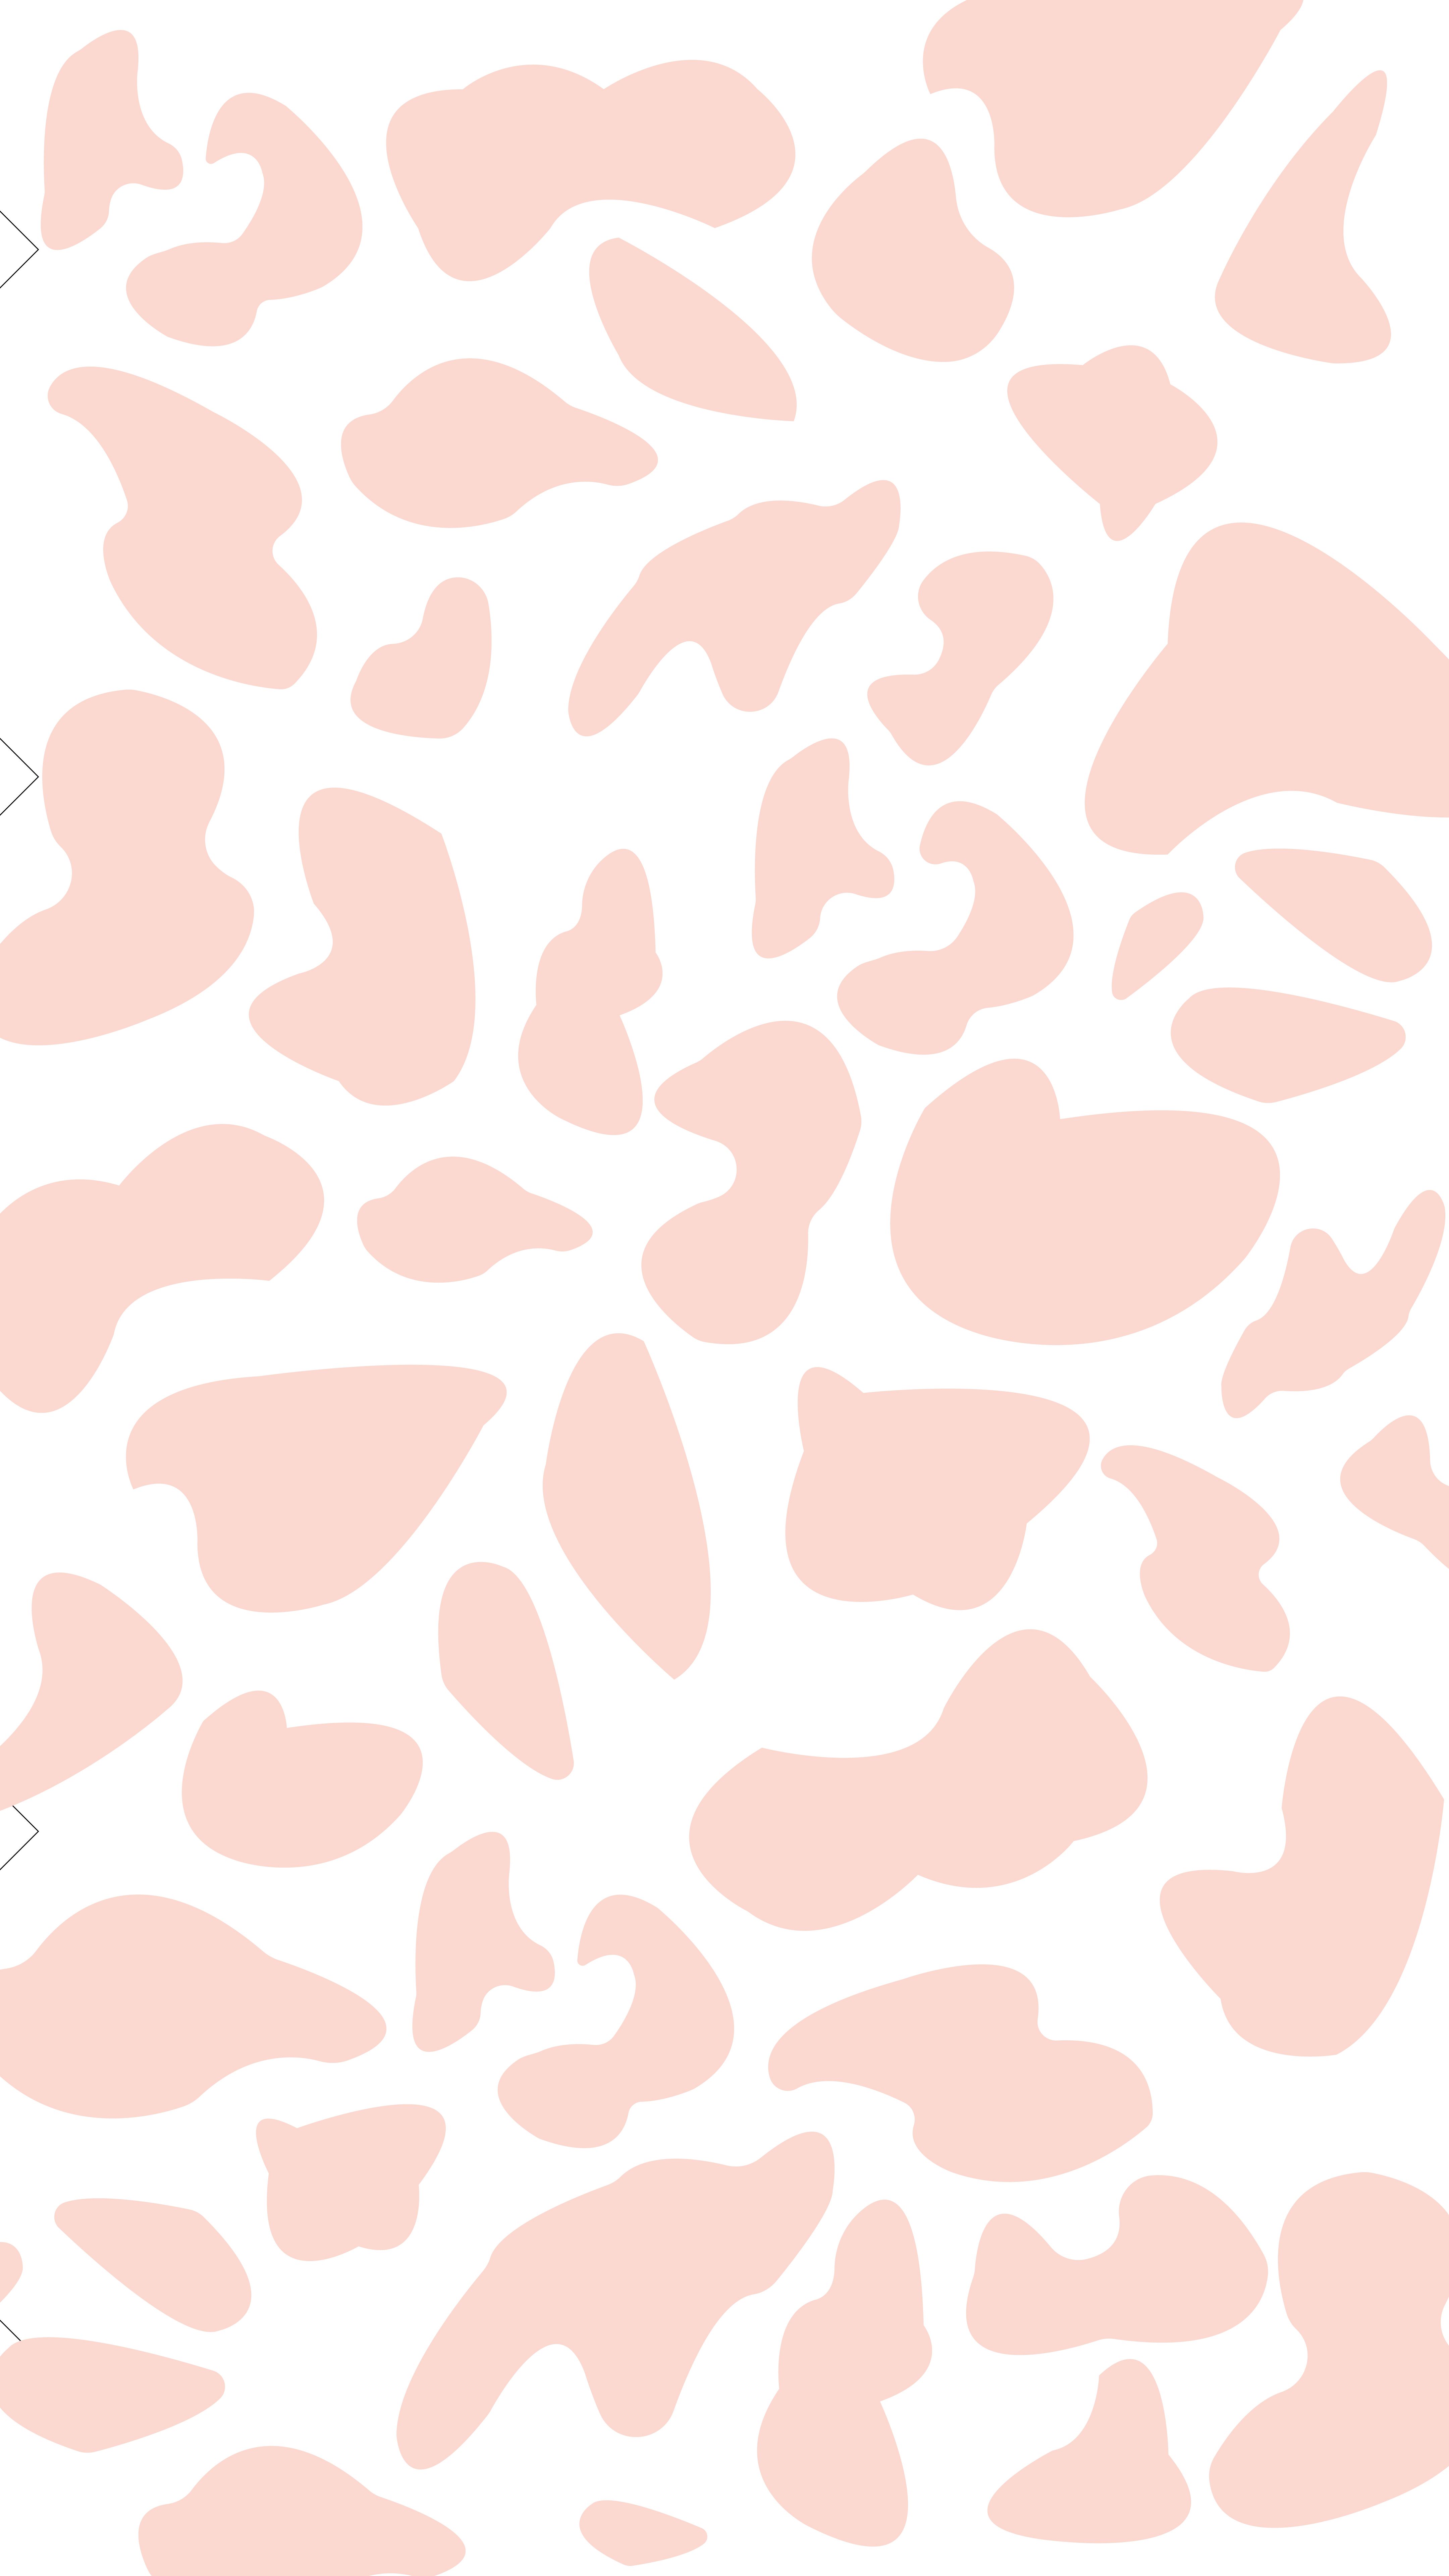 Pink Cow Skin Pattern Design Simple Stock Vector Royalty Free 1397181665   Shutterstock